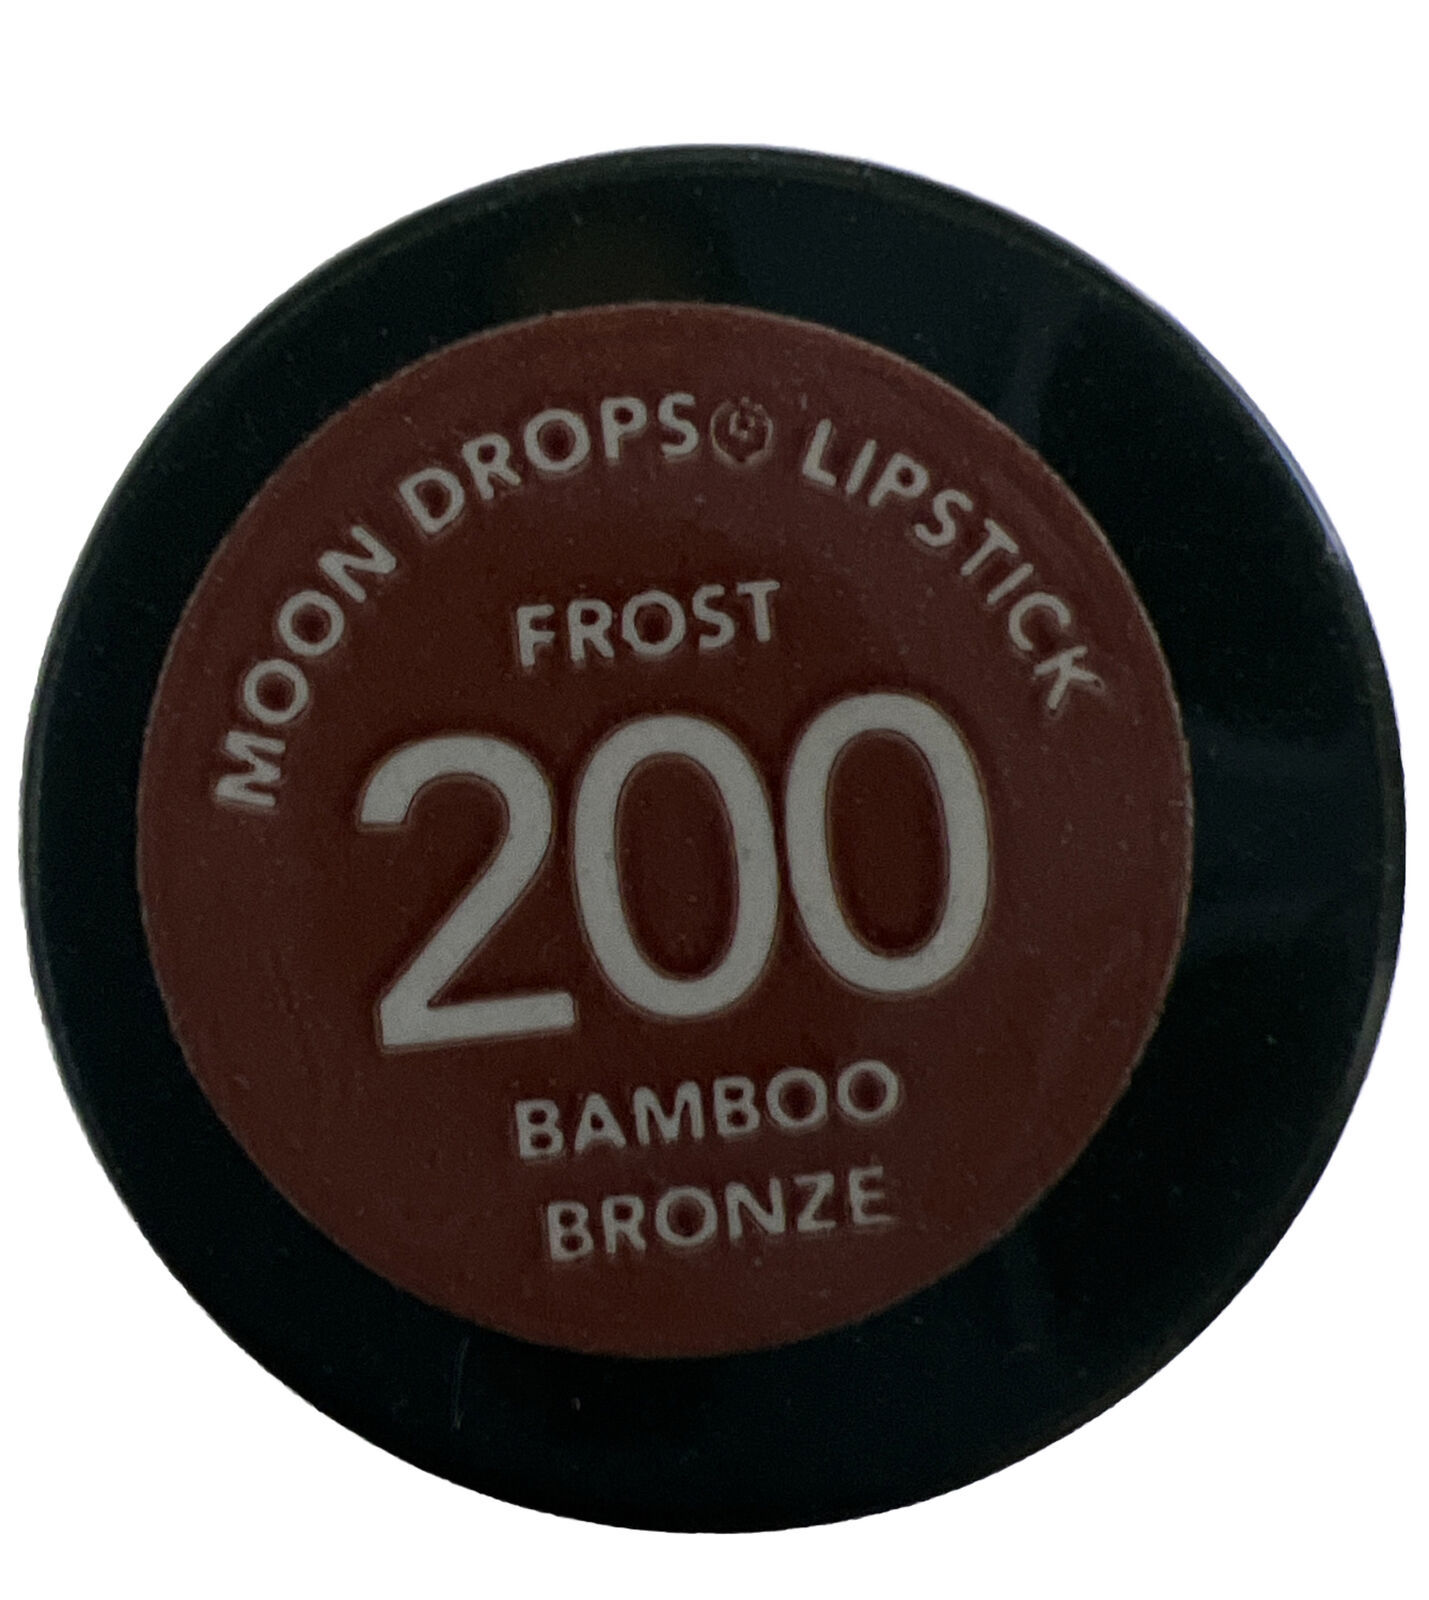 Revlon Moon Drops Lipstick Frost #200 BAMBOO BRONZE (NEW/SEALED) DISCONTINUED - $39.59